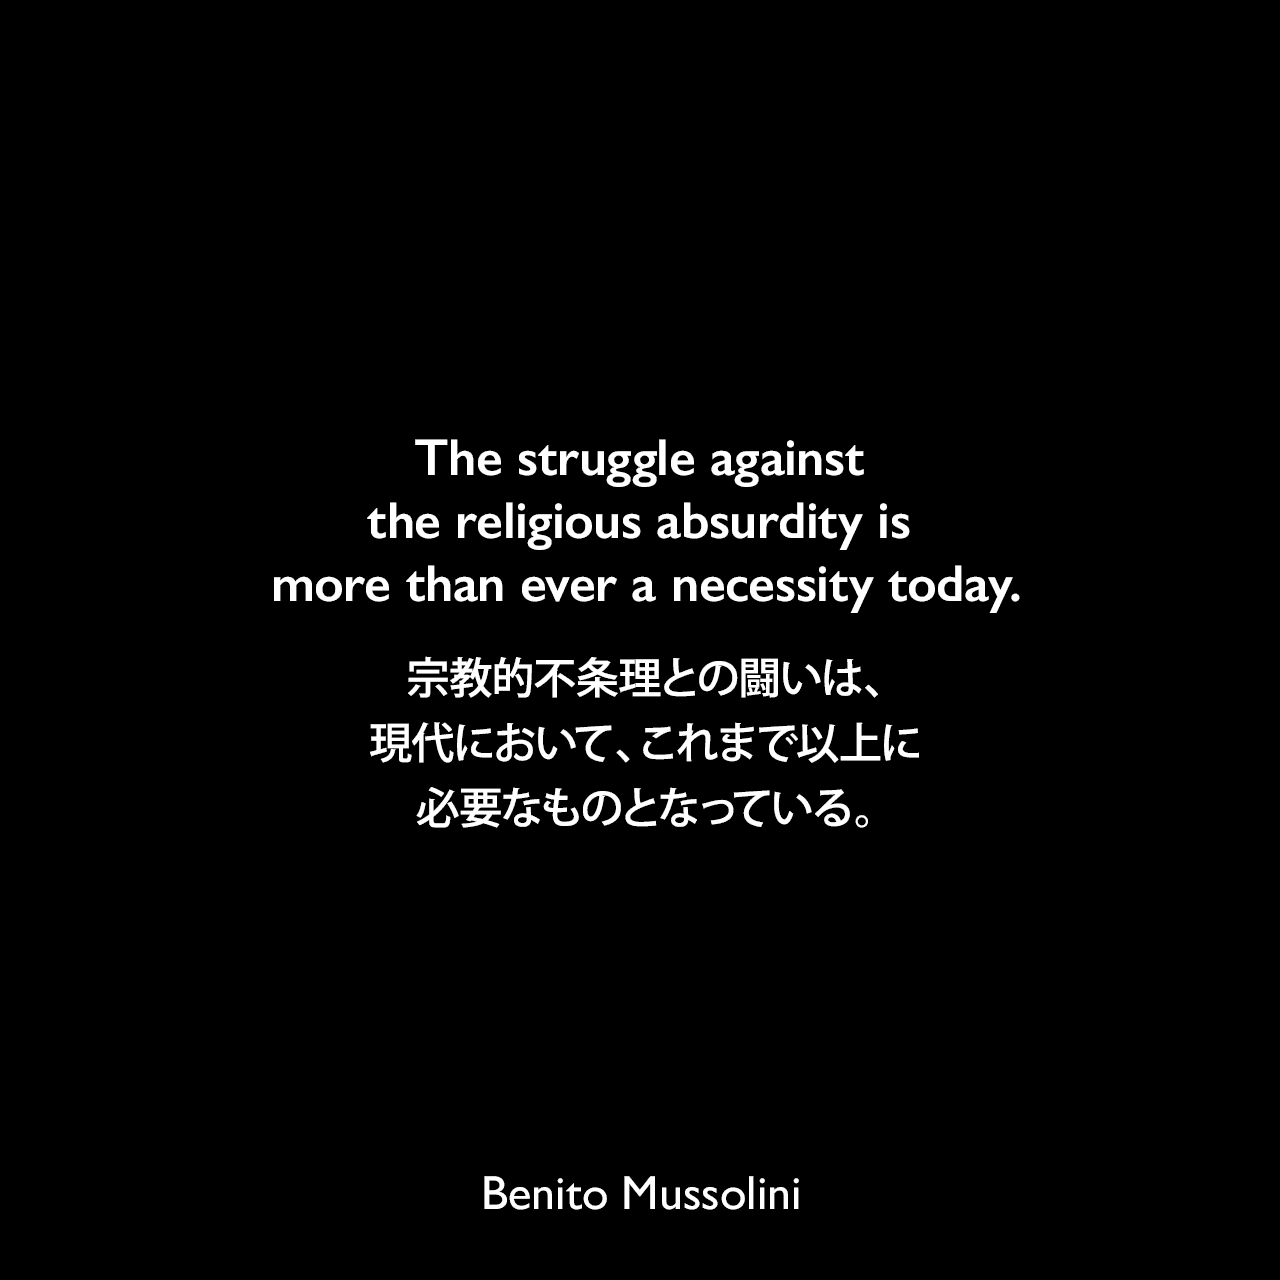 The struggle against the religious absurdity is more than ever a necessity today.宗教的不条理との闘いは、現代において、これまで以上に必要なものとなっている。- ムッソリーニによる本「God Does Not Exist.」（1904年）よりBenito Mussolini